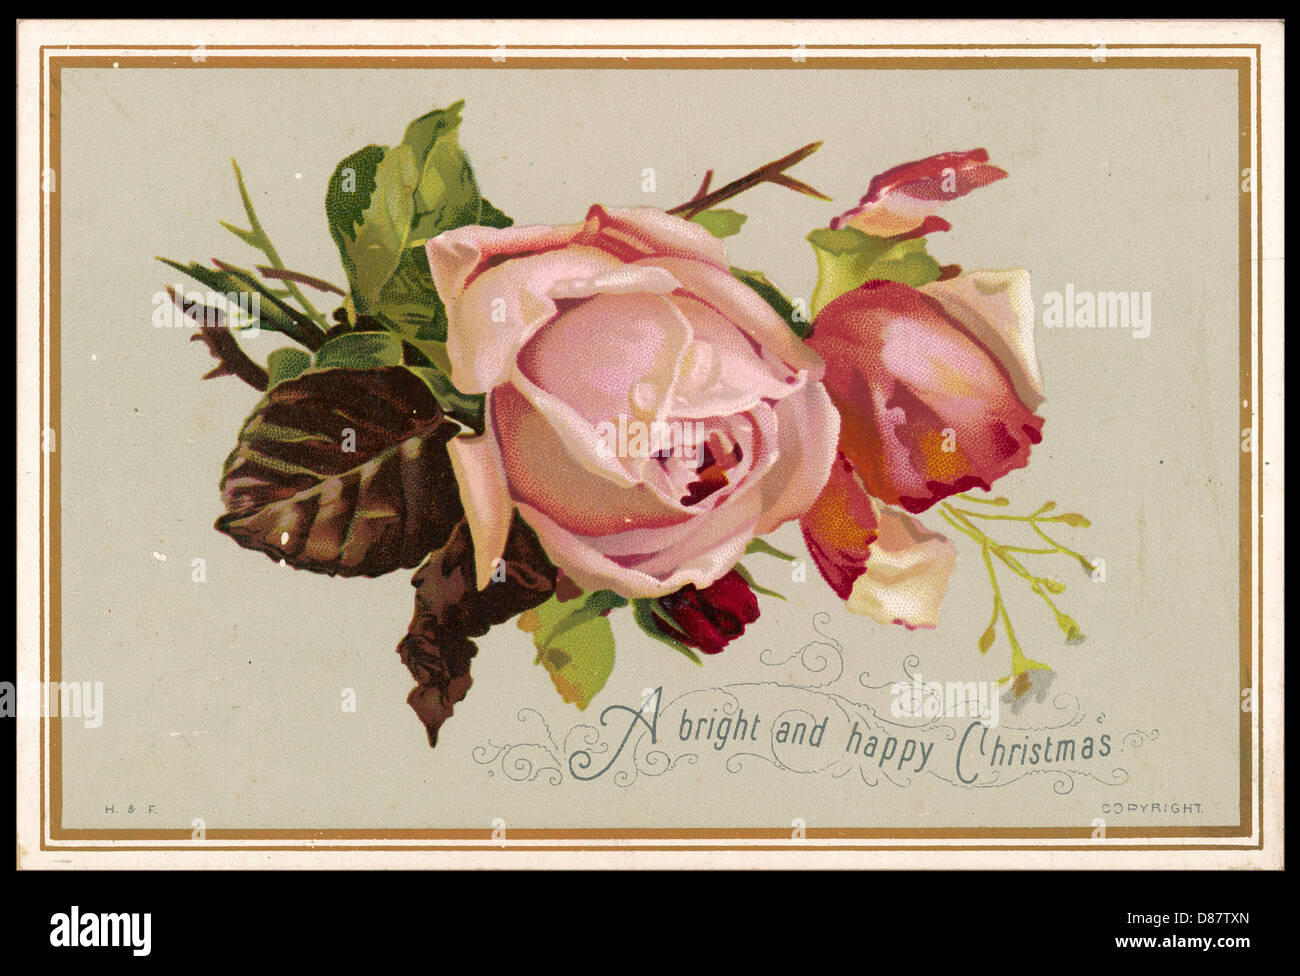 PALE PINK ROSE Stock Photo